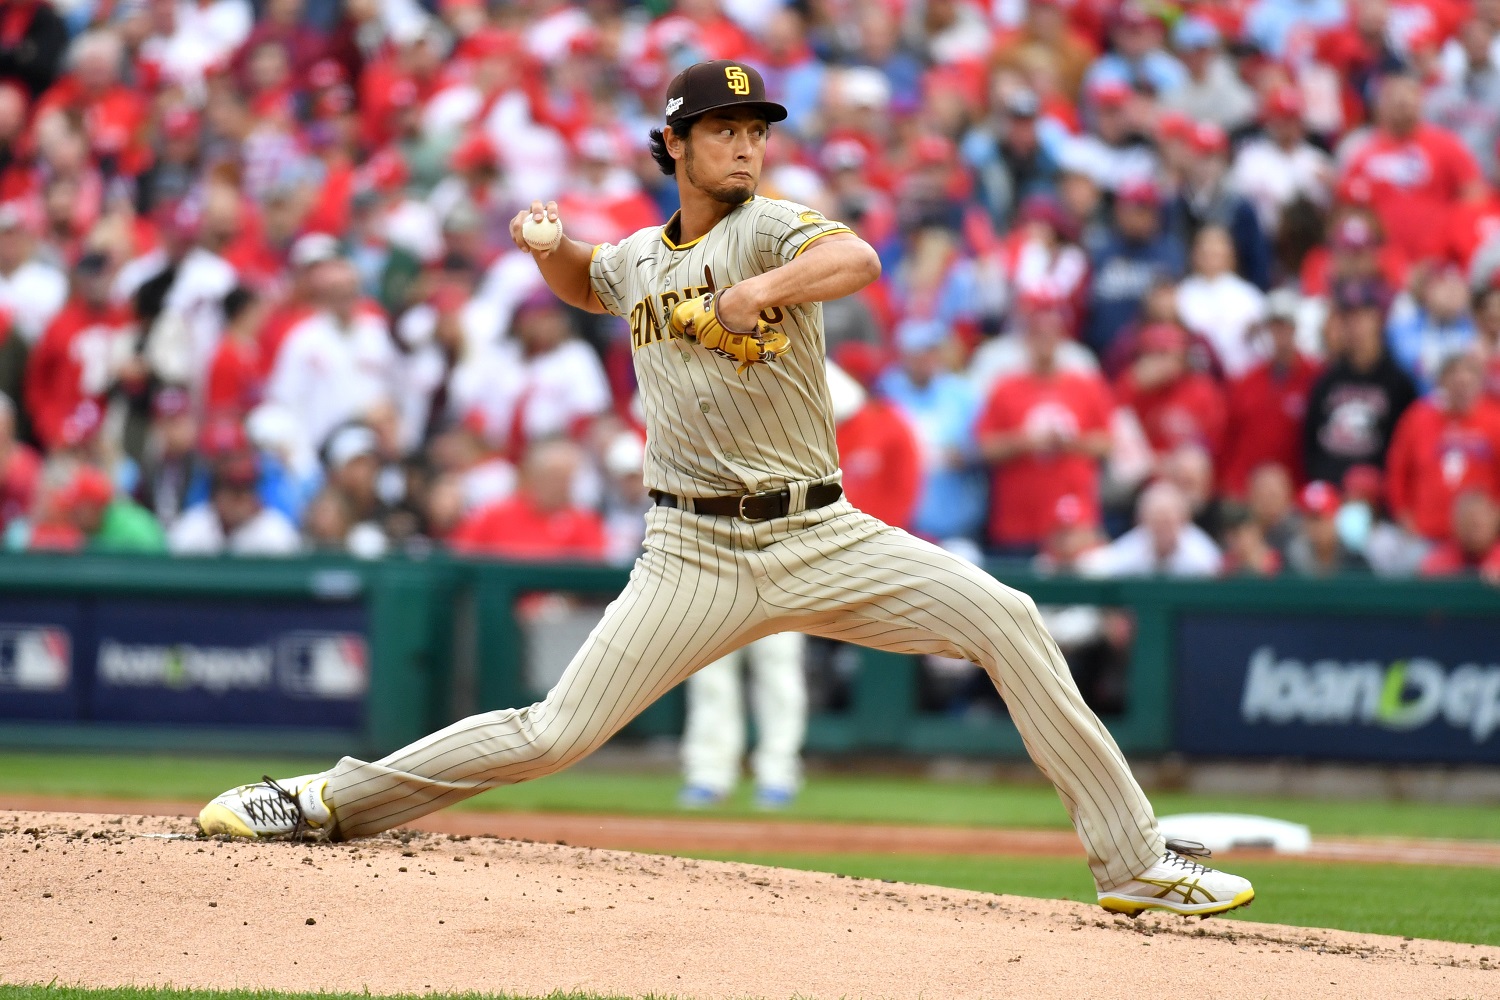 Oakland A's news: Padres acquire Yu Darvish from Cubs - Athletics